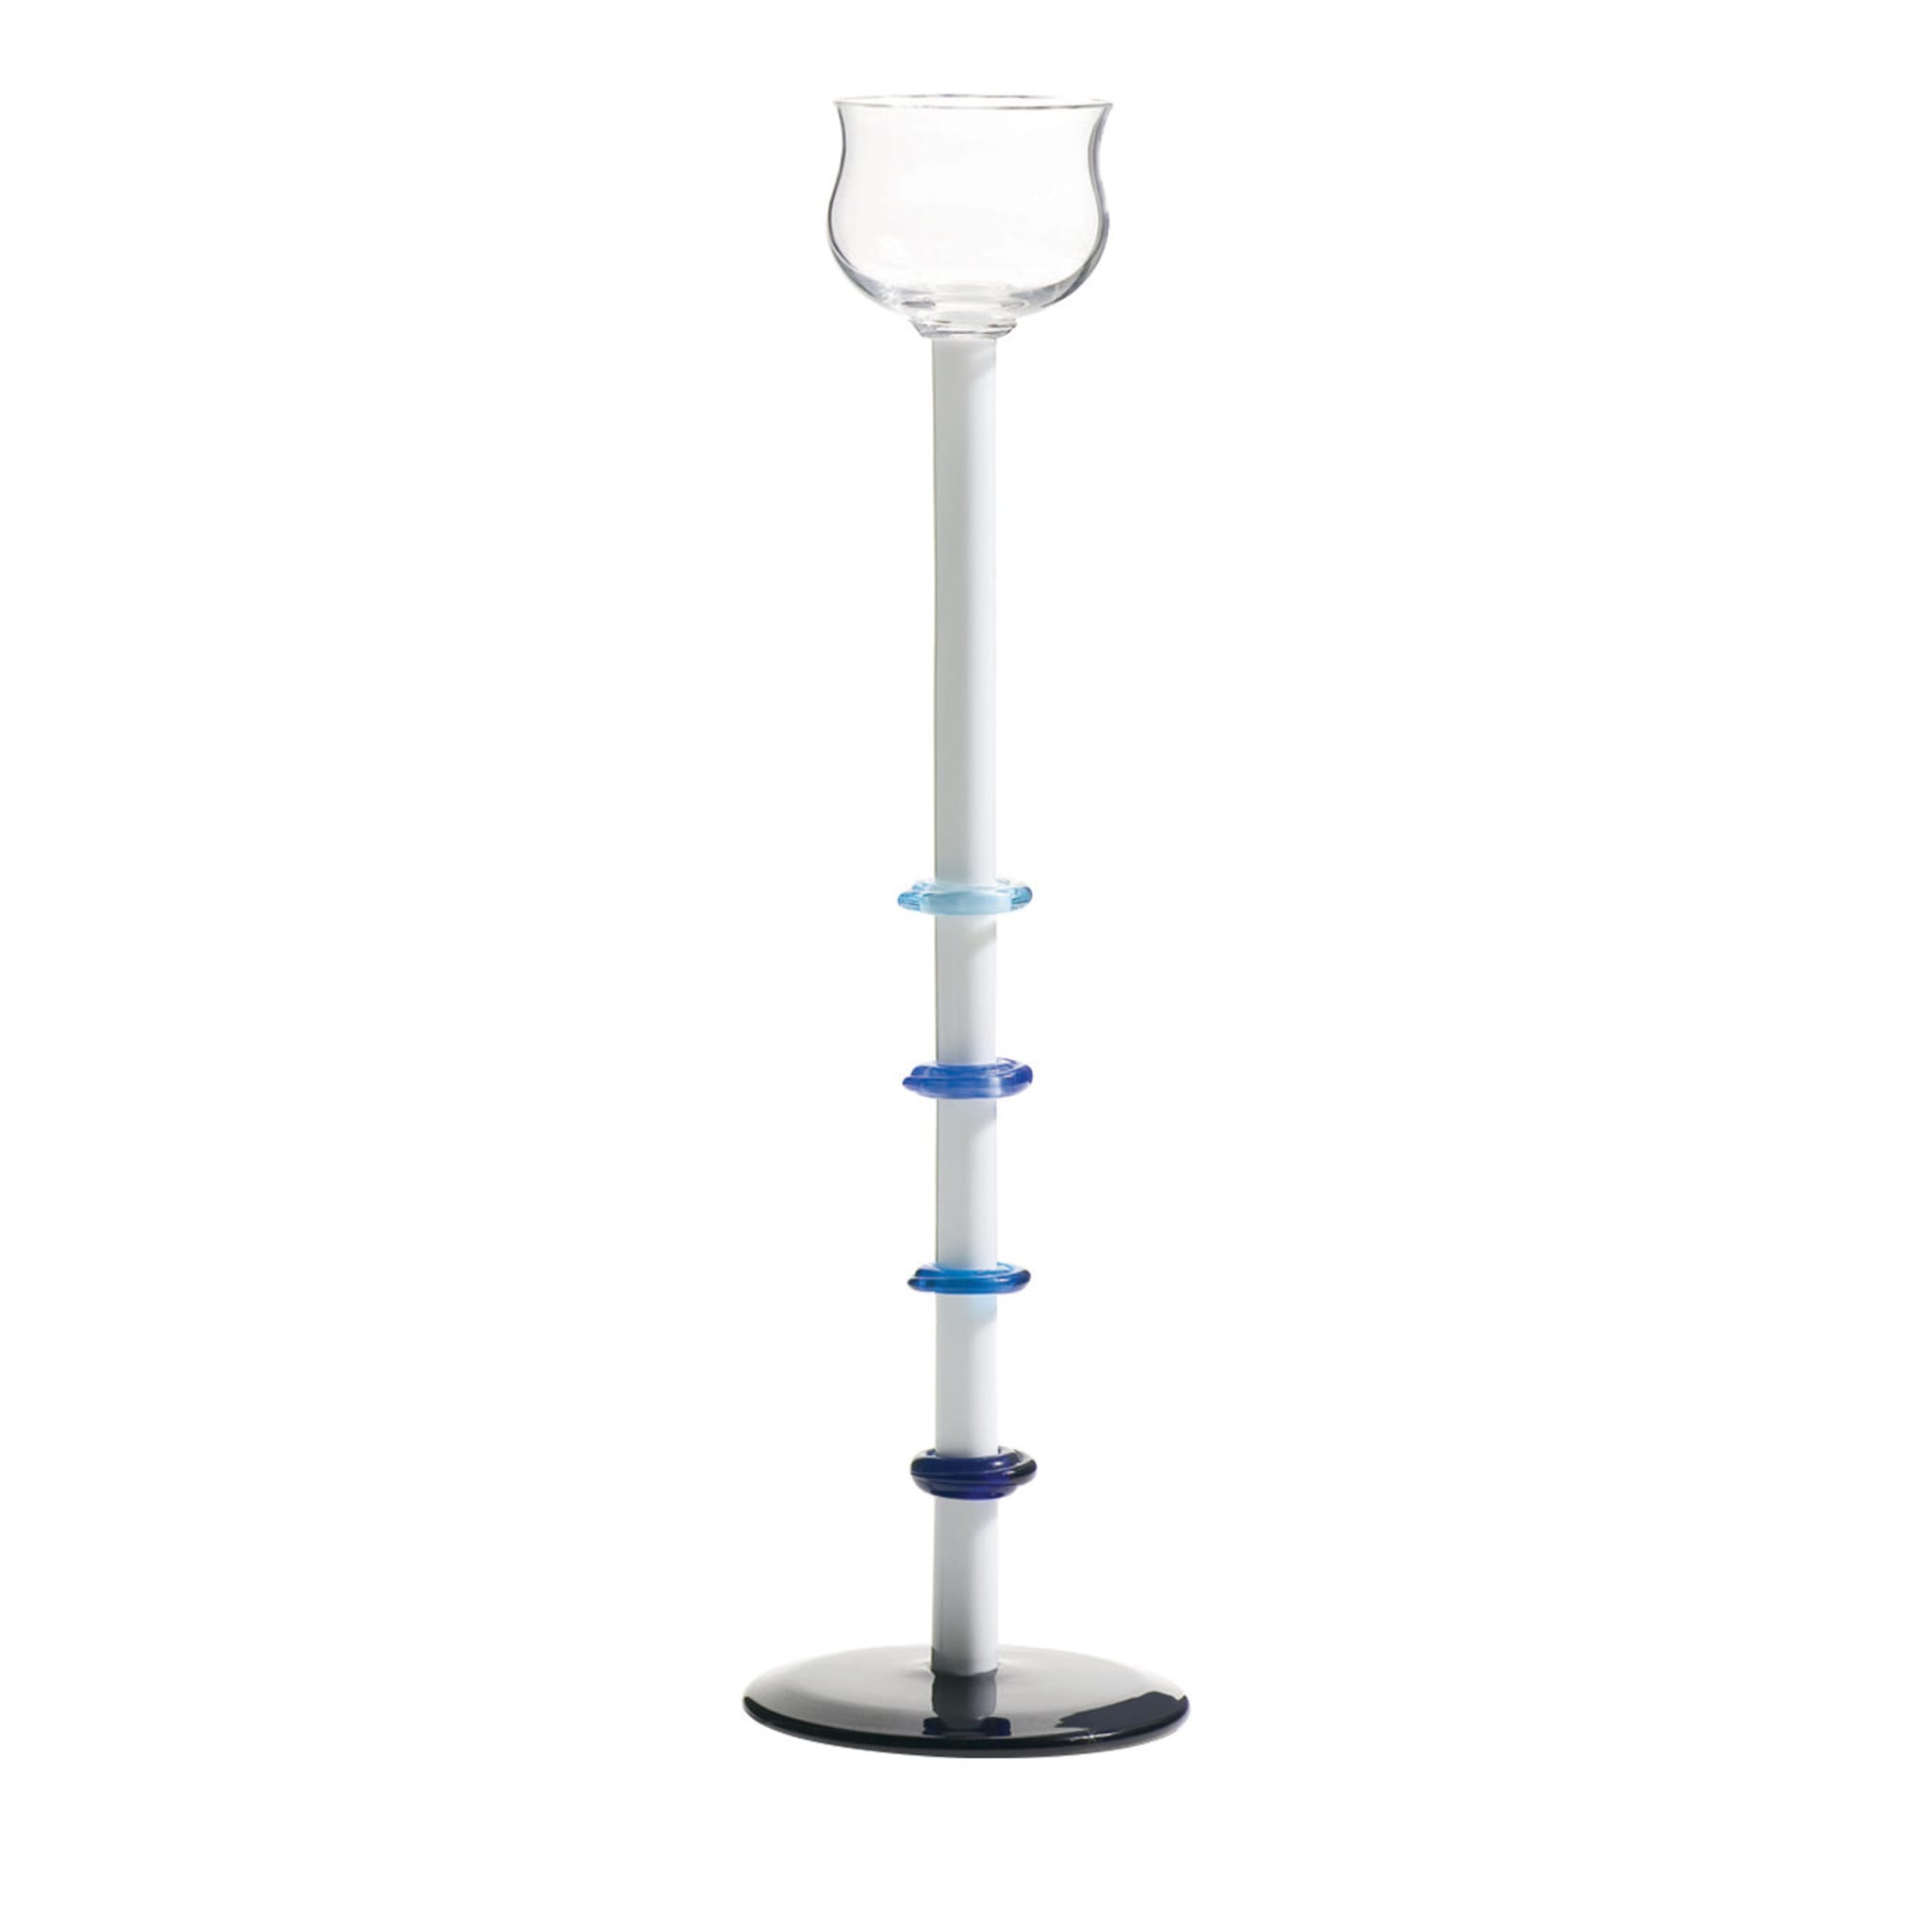 Delle Silenziose Lacrime Limited Edition Wine Glass by Ettore Sottsass - Main view